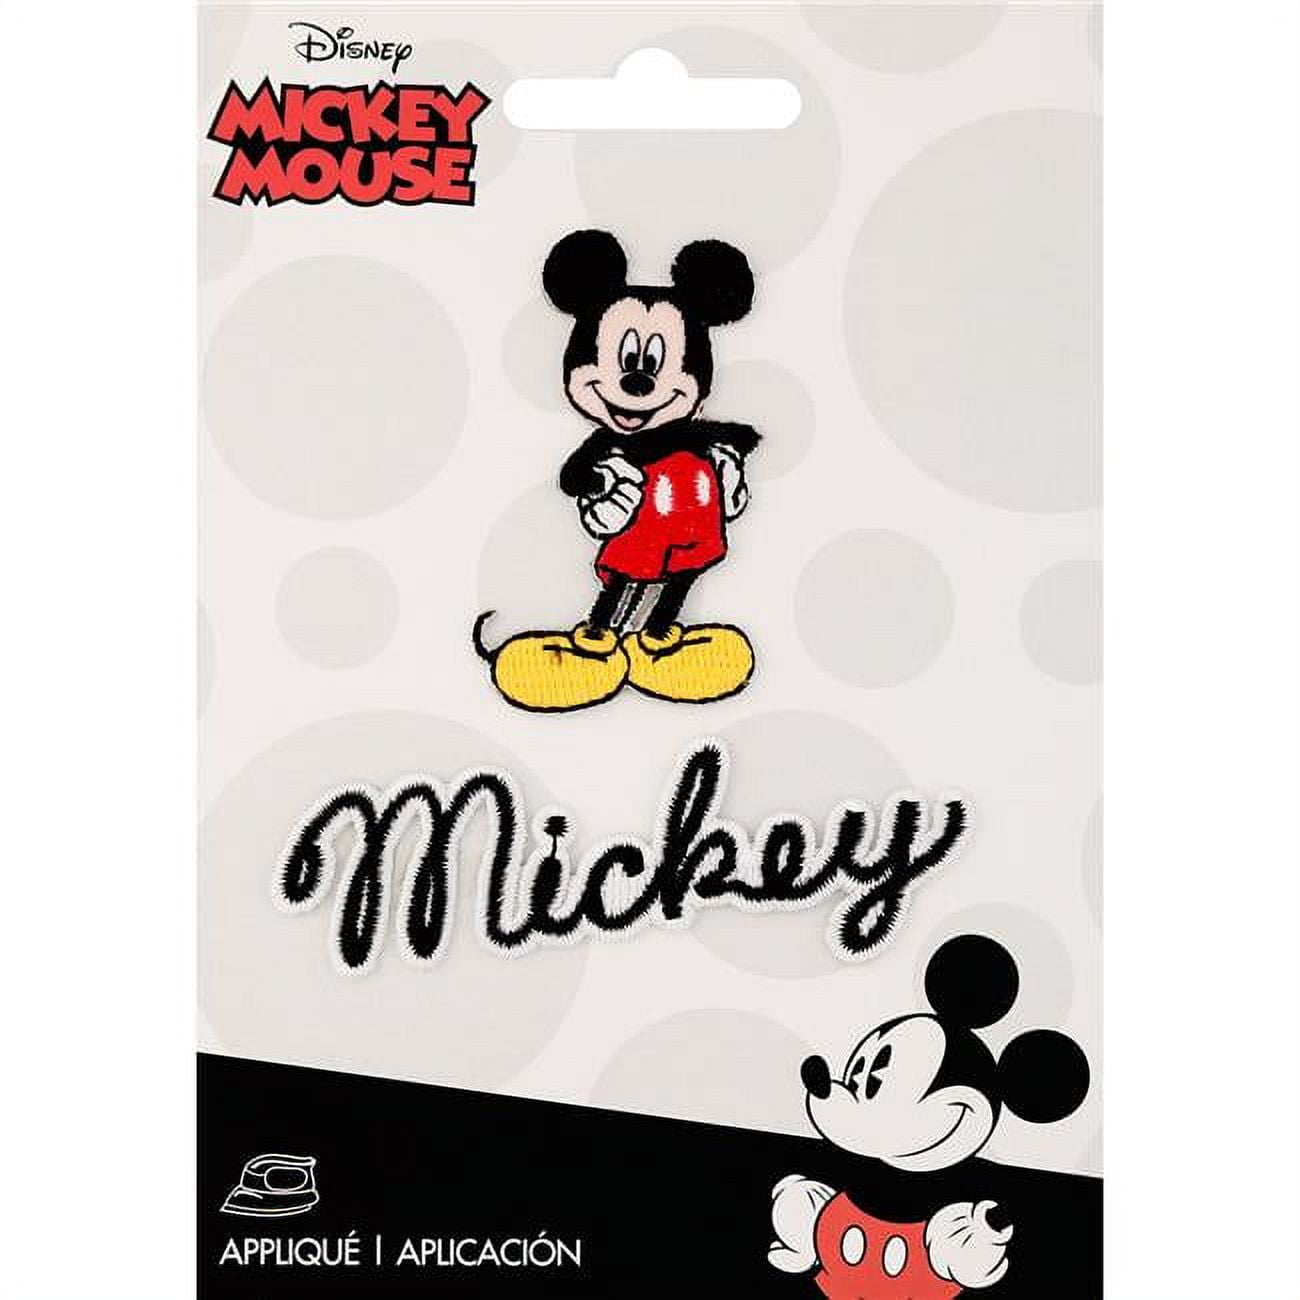 Simplicity Disney Minnie Mouse Iron on Applique Patch for Clothes, Backpacks, and Accessories, 2.75 W x 3 L, Multicolor